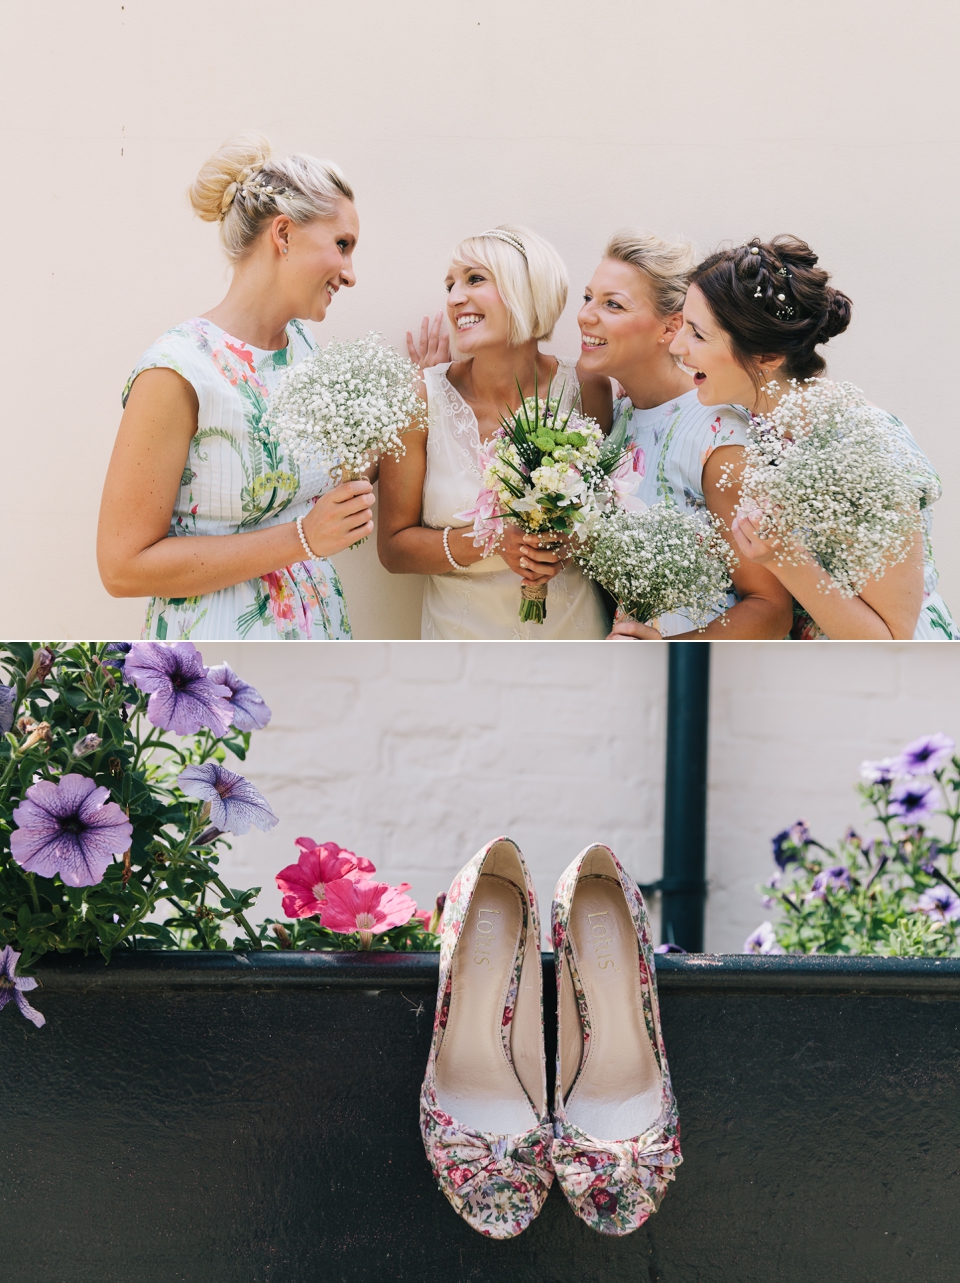 Colourful wedding shoes